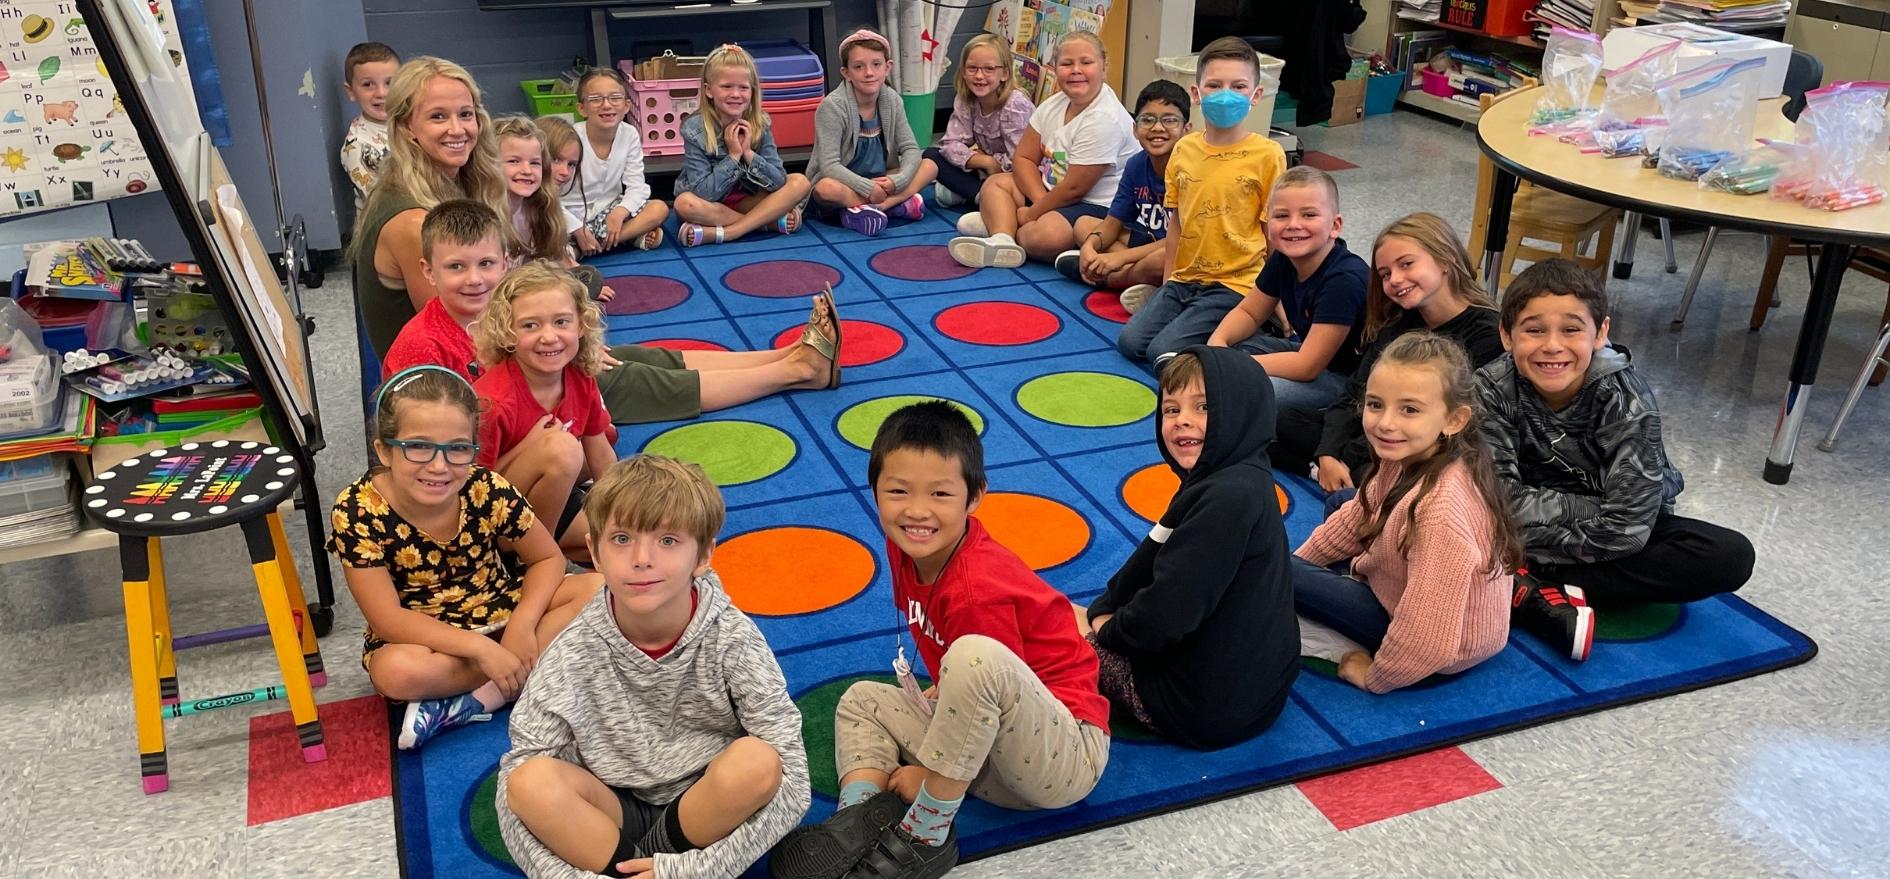 Elementary students in class sitting on reading carpet smiling for the camera